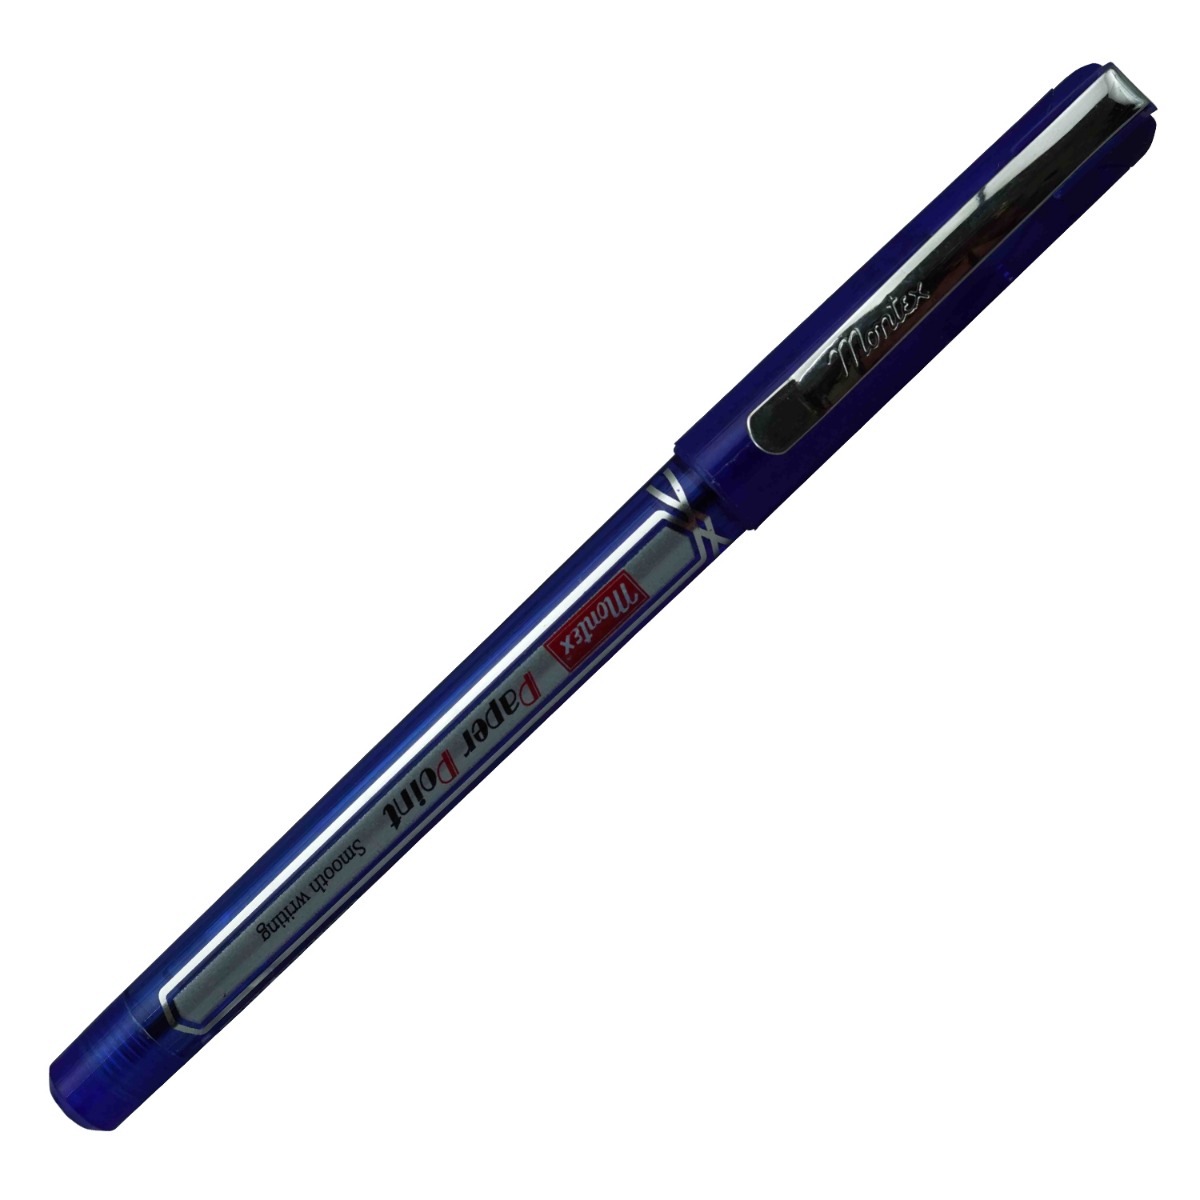 Montex Paper Point Glider Model:16104 Blue Color Body With Silver Clip Cap Type Fine Tip Blue Writing Ball Pen